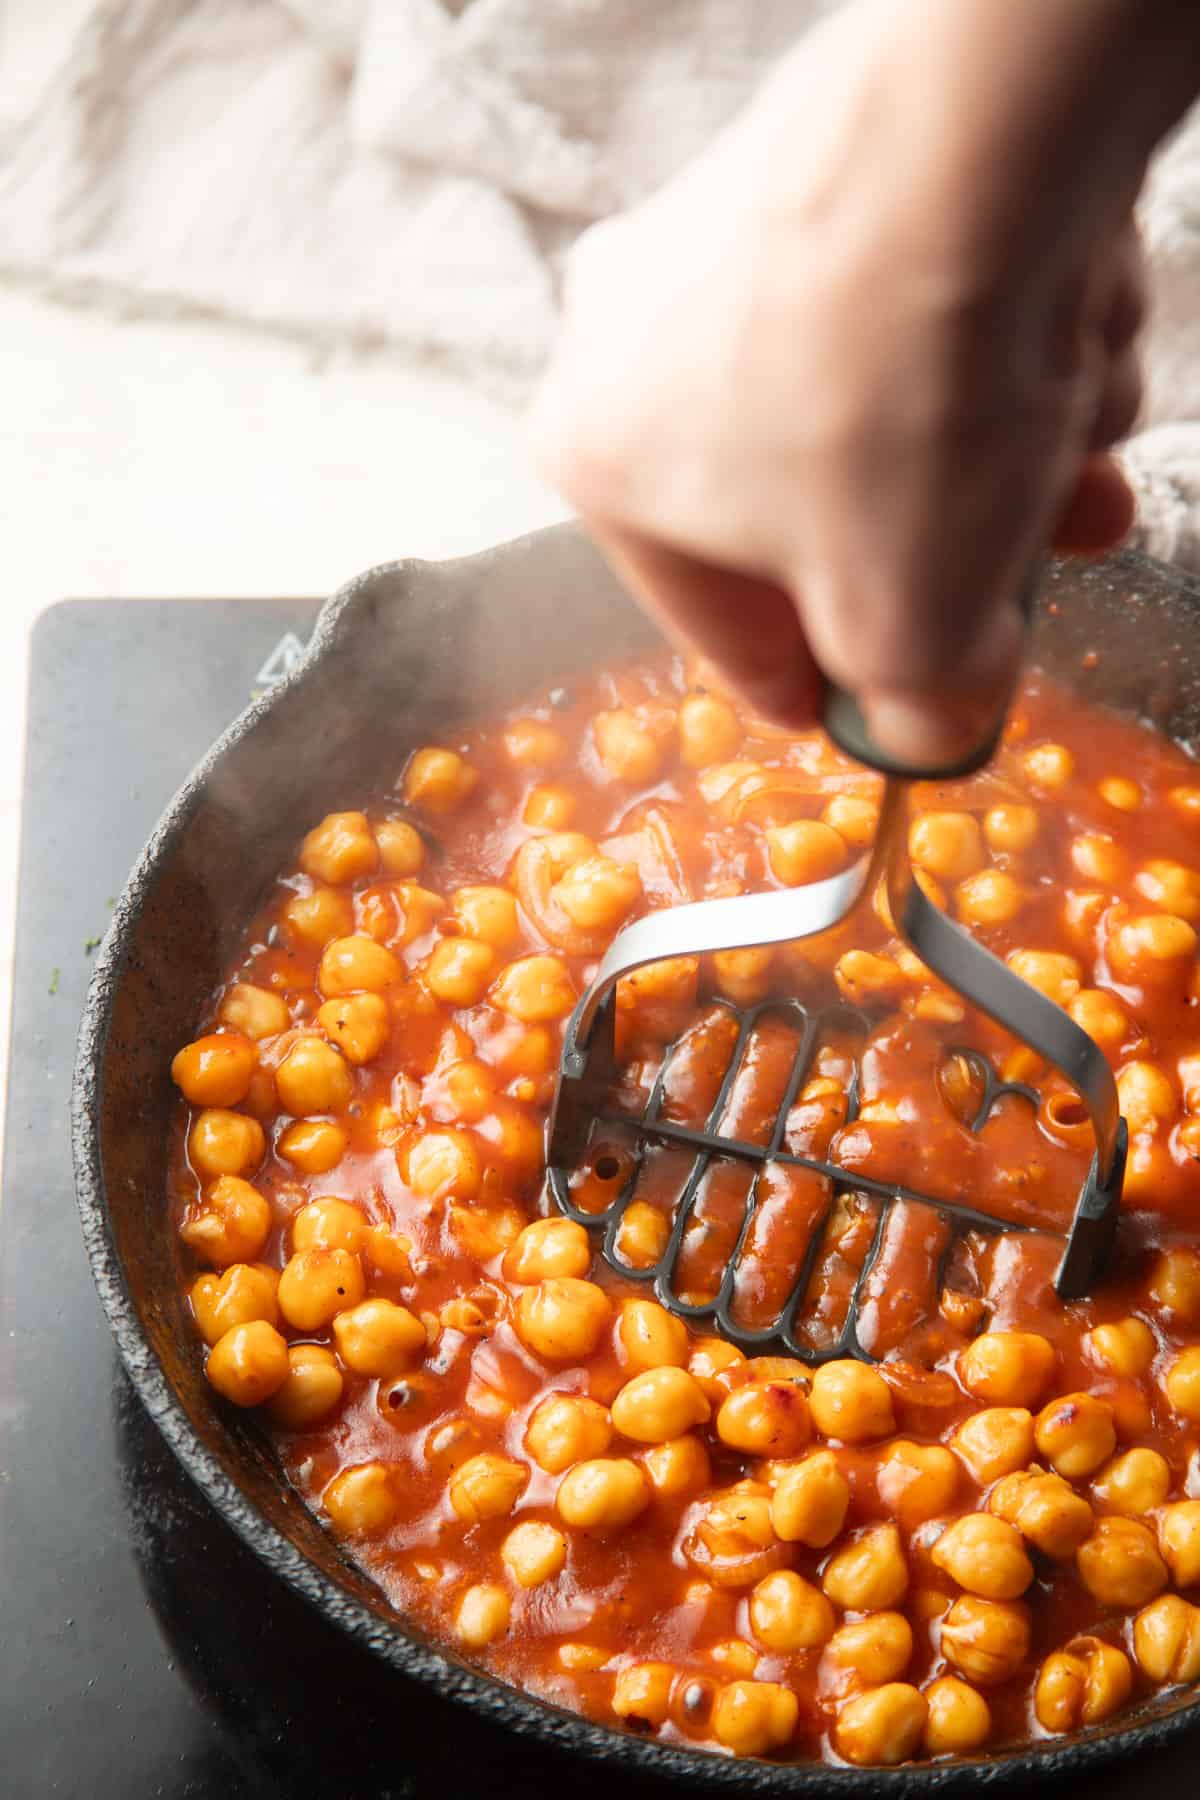 Hand mashing chickpeas in barbecue sauce in a skillet.